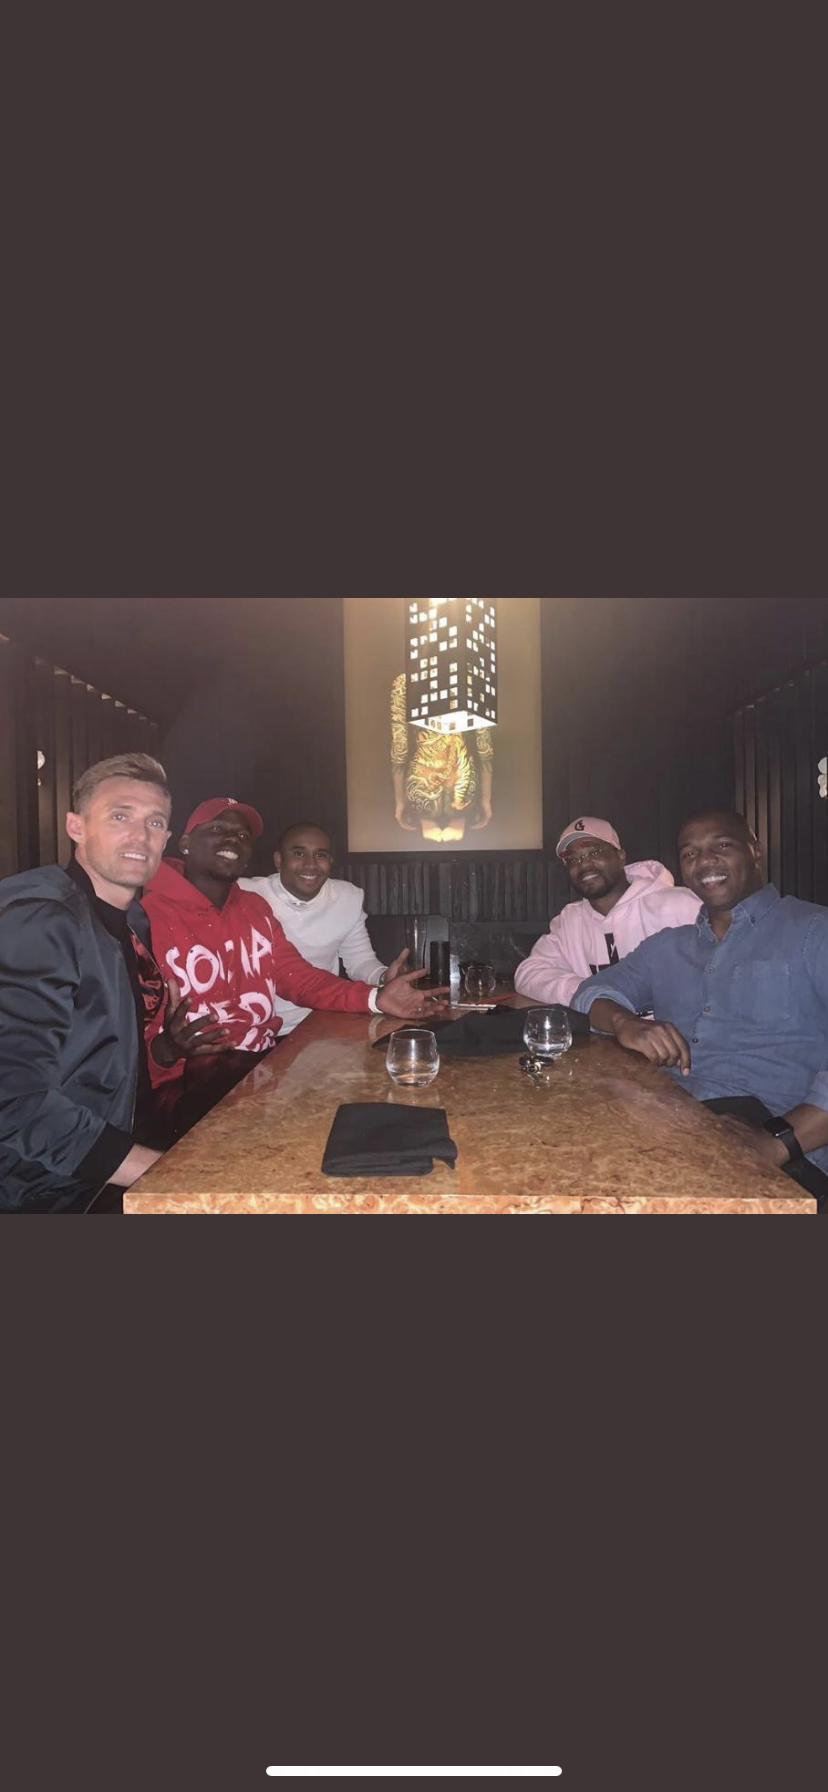 Pogba recruiting some free agents.